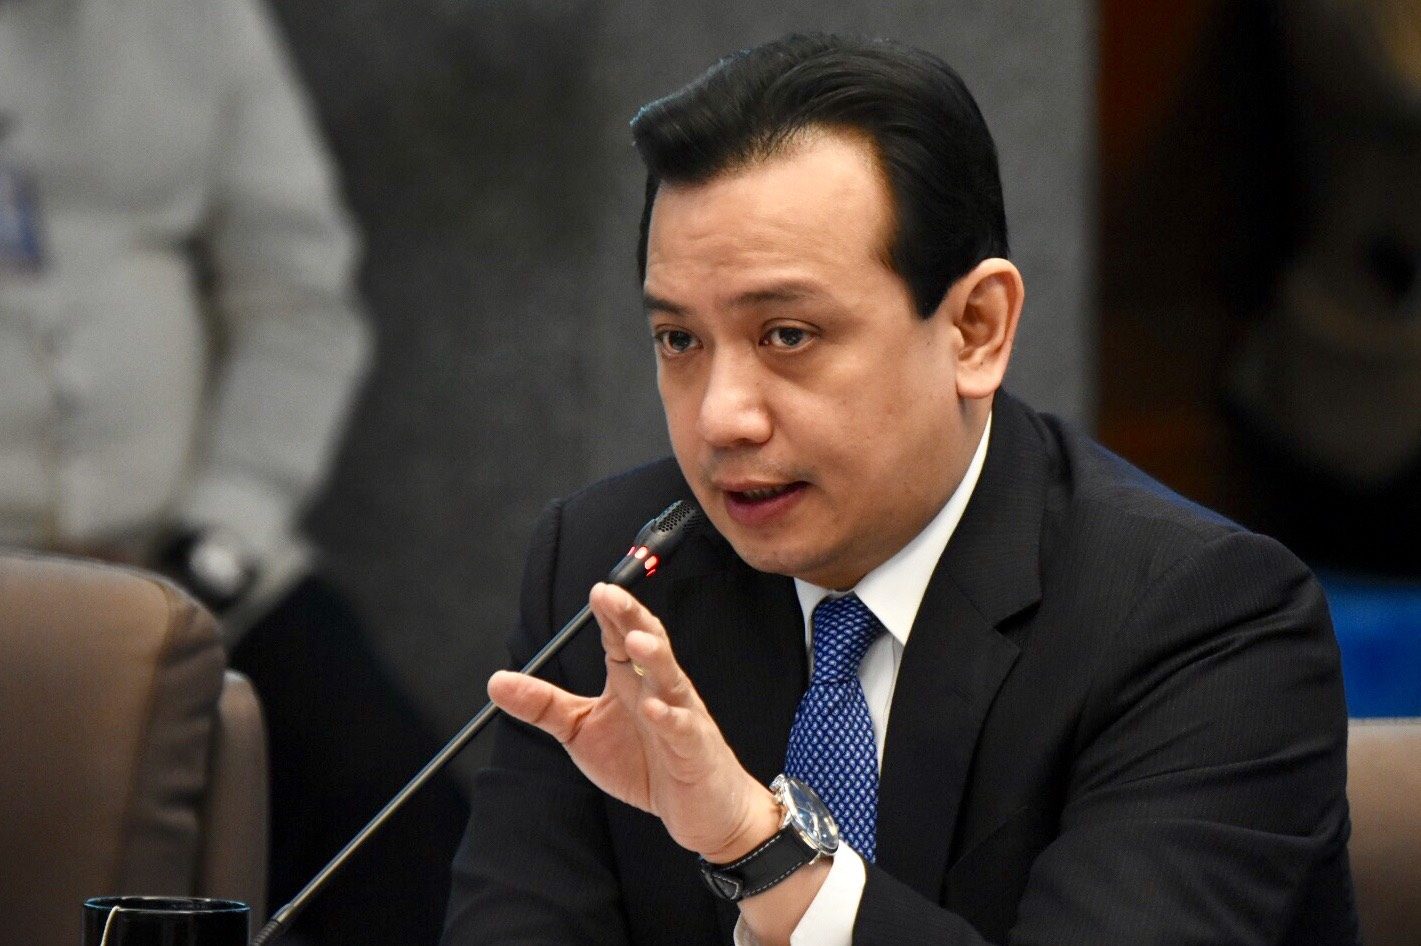 Trillanes says he’ll go to jail if Duterte proves claims vs parents